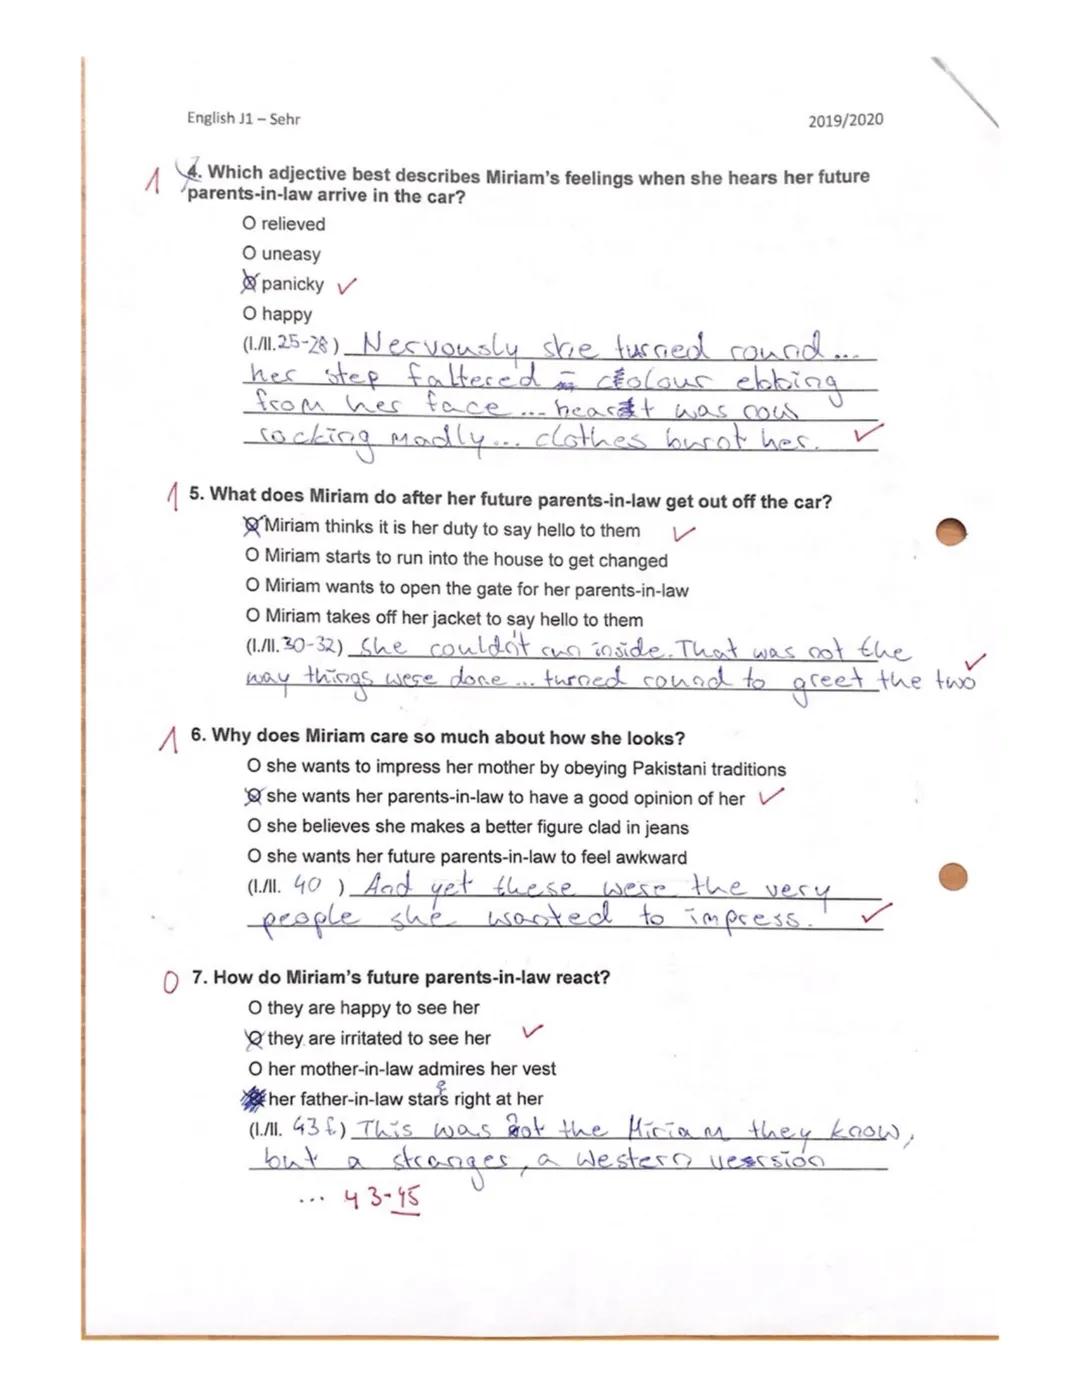 English J1 - Sehr
10
EXAM 1: Multicultural Britain
Name: Jacqueline
Credits: 28 /35
2019/2020
Grade:
(12) 1096 )
Well done! Sch
Good Luck
A 